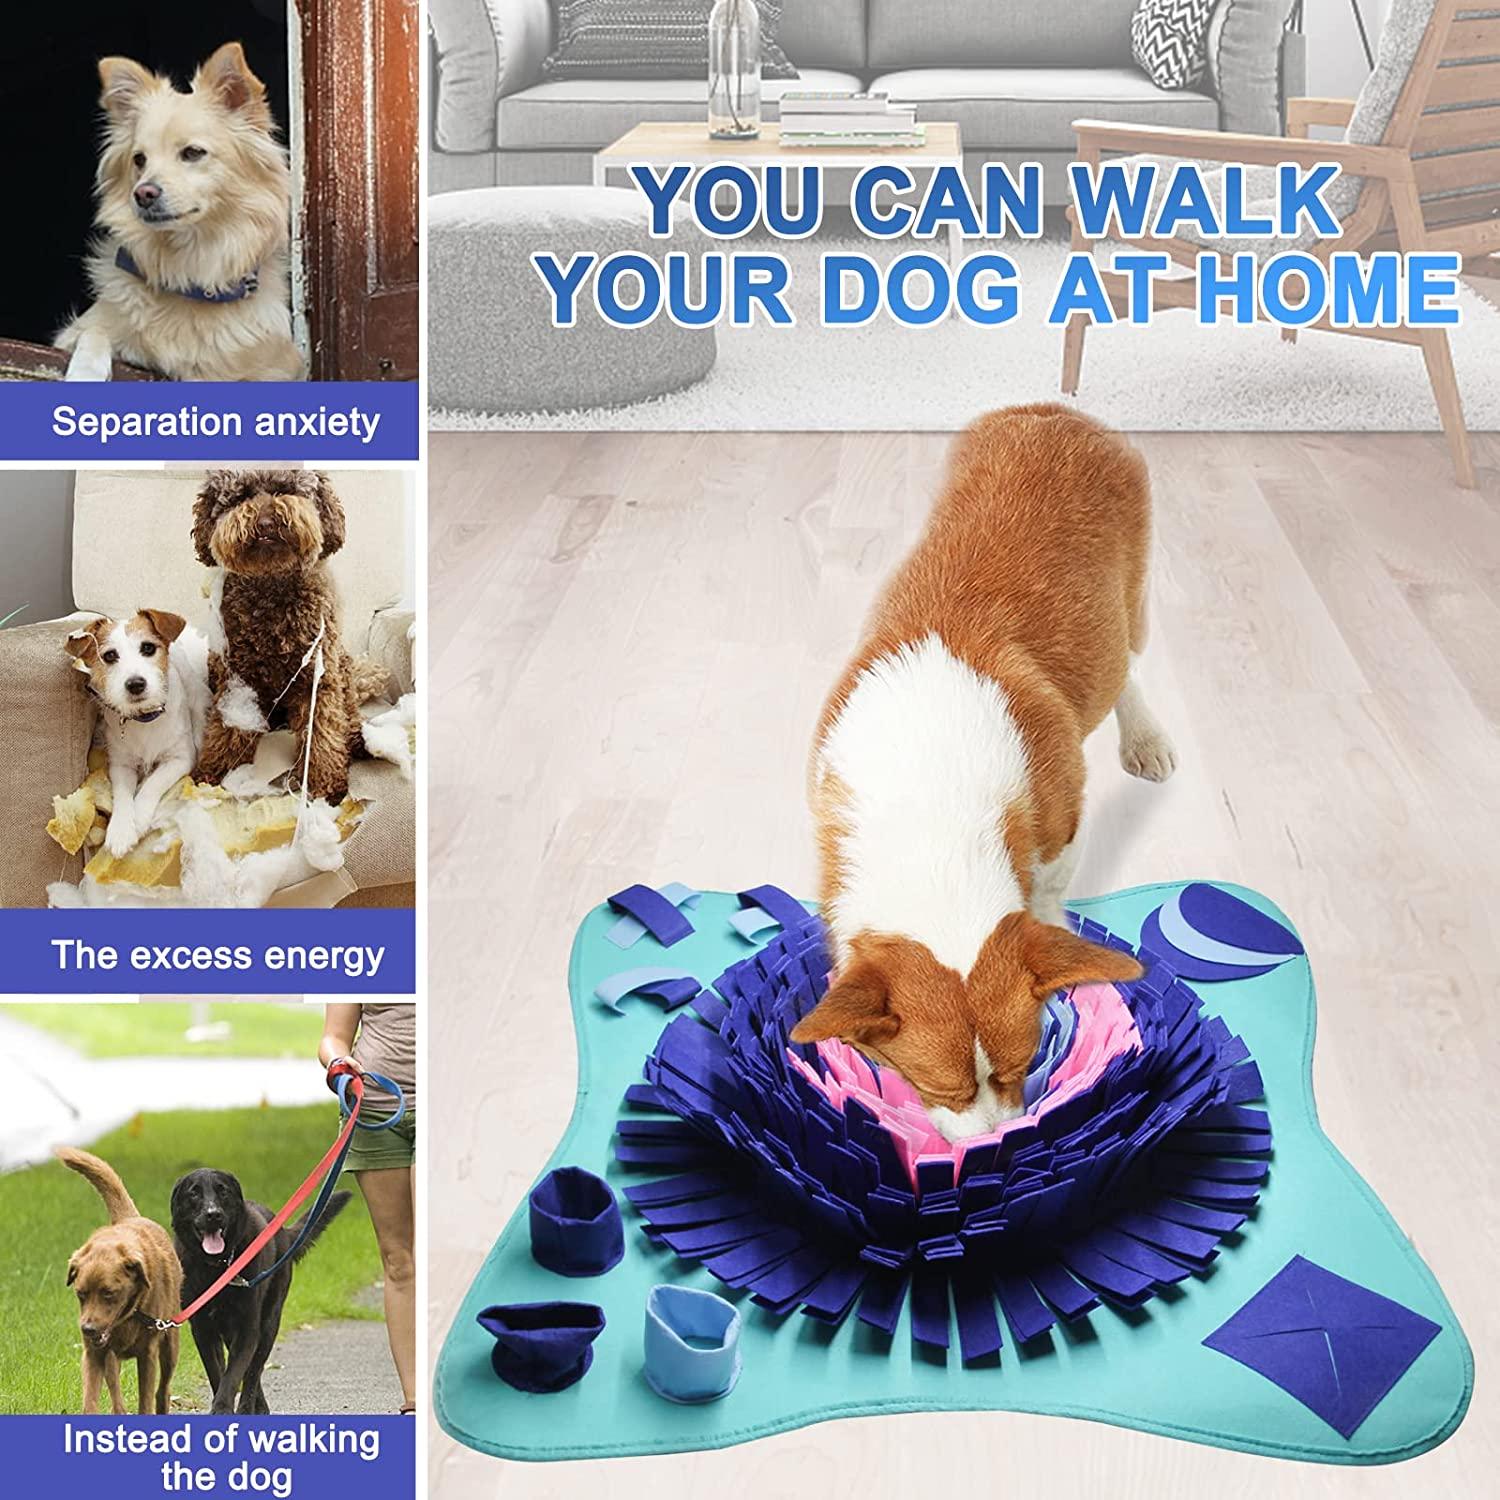 Best snuffle mats for dogs: to encourage natural foraging instincts